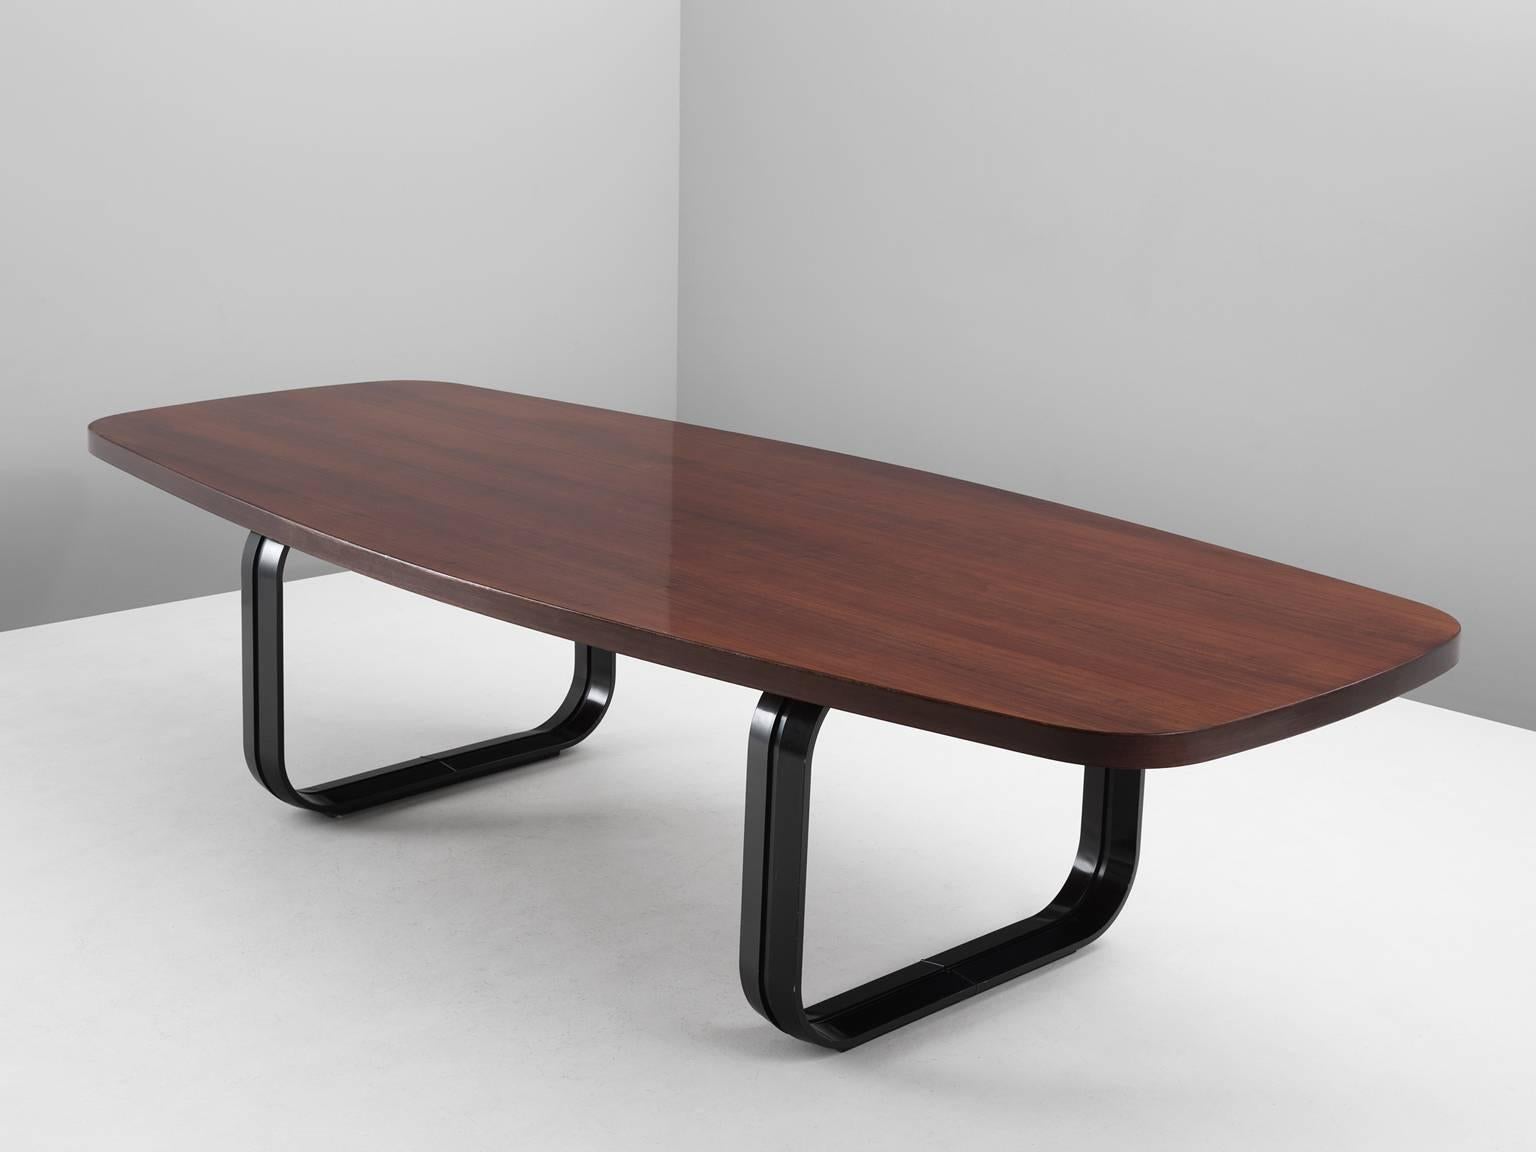 Dining table in mahogany and metal, Italy, 1960s.

Large conference table with boat shaped top. The top shows the beautiful grain of the mahogany wood. The base consist of two square legs made out of bended metal. These modern metal legs make a